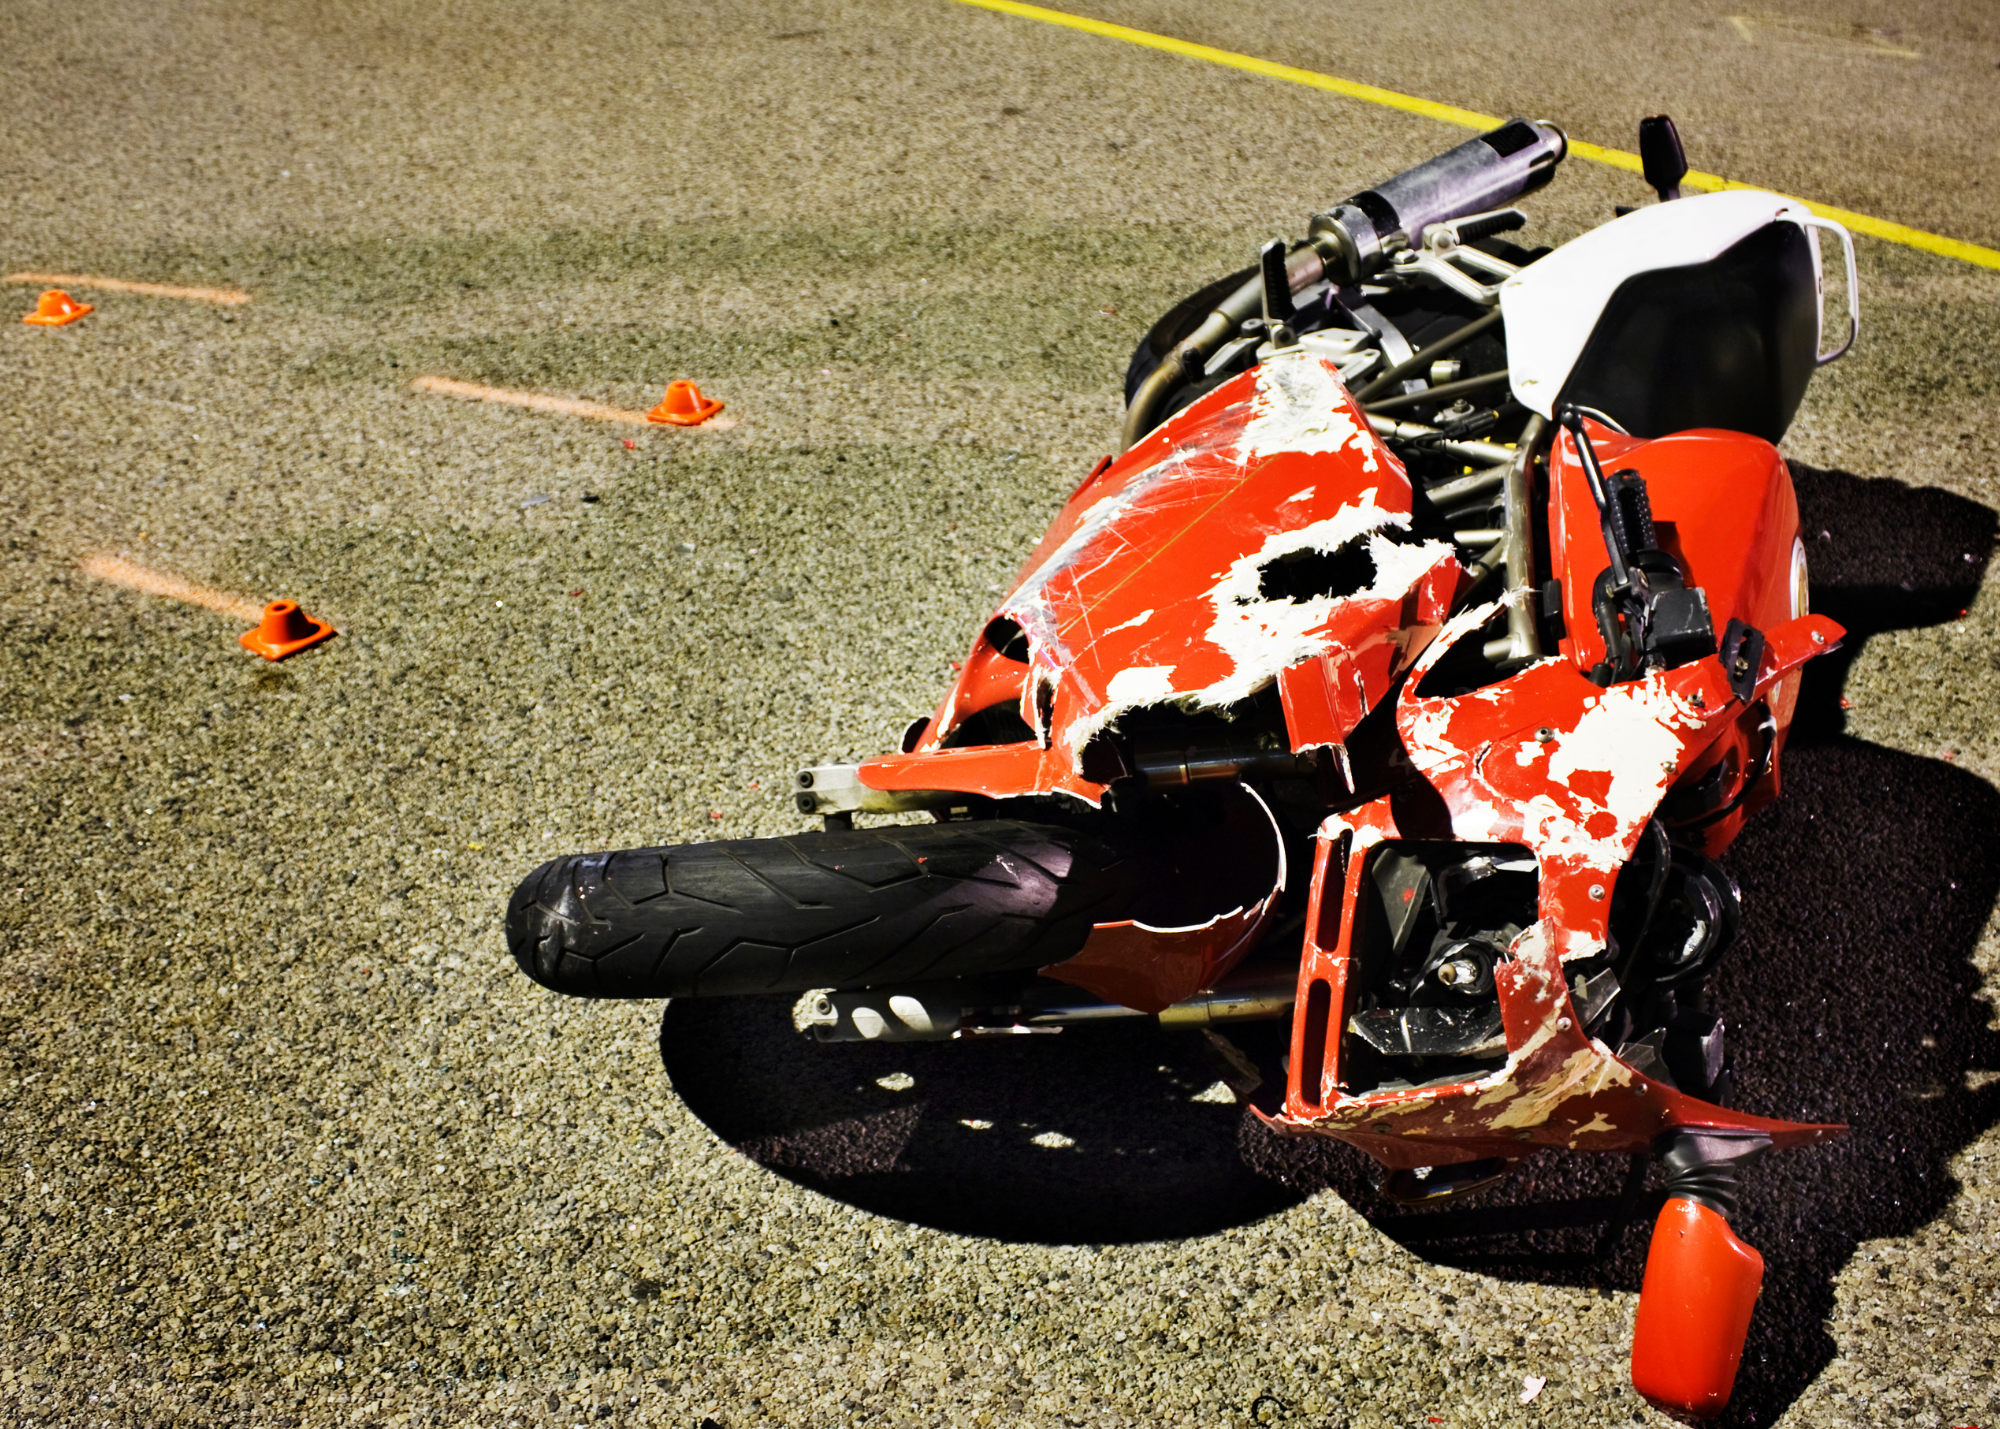 Motorcycle Accident - Motorcycle Accident Lawyer in Rock Hill, SC Offering Legal Guidance